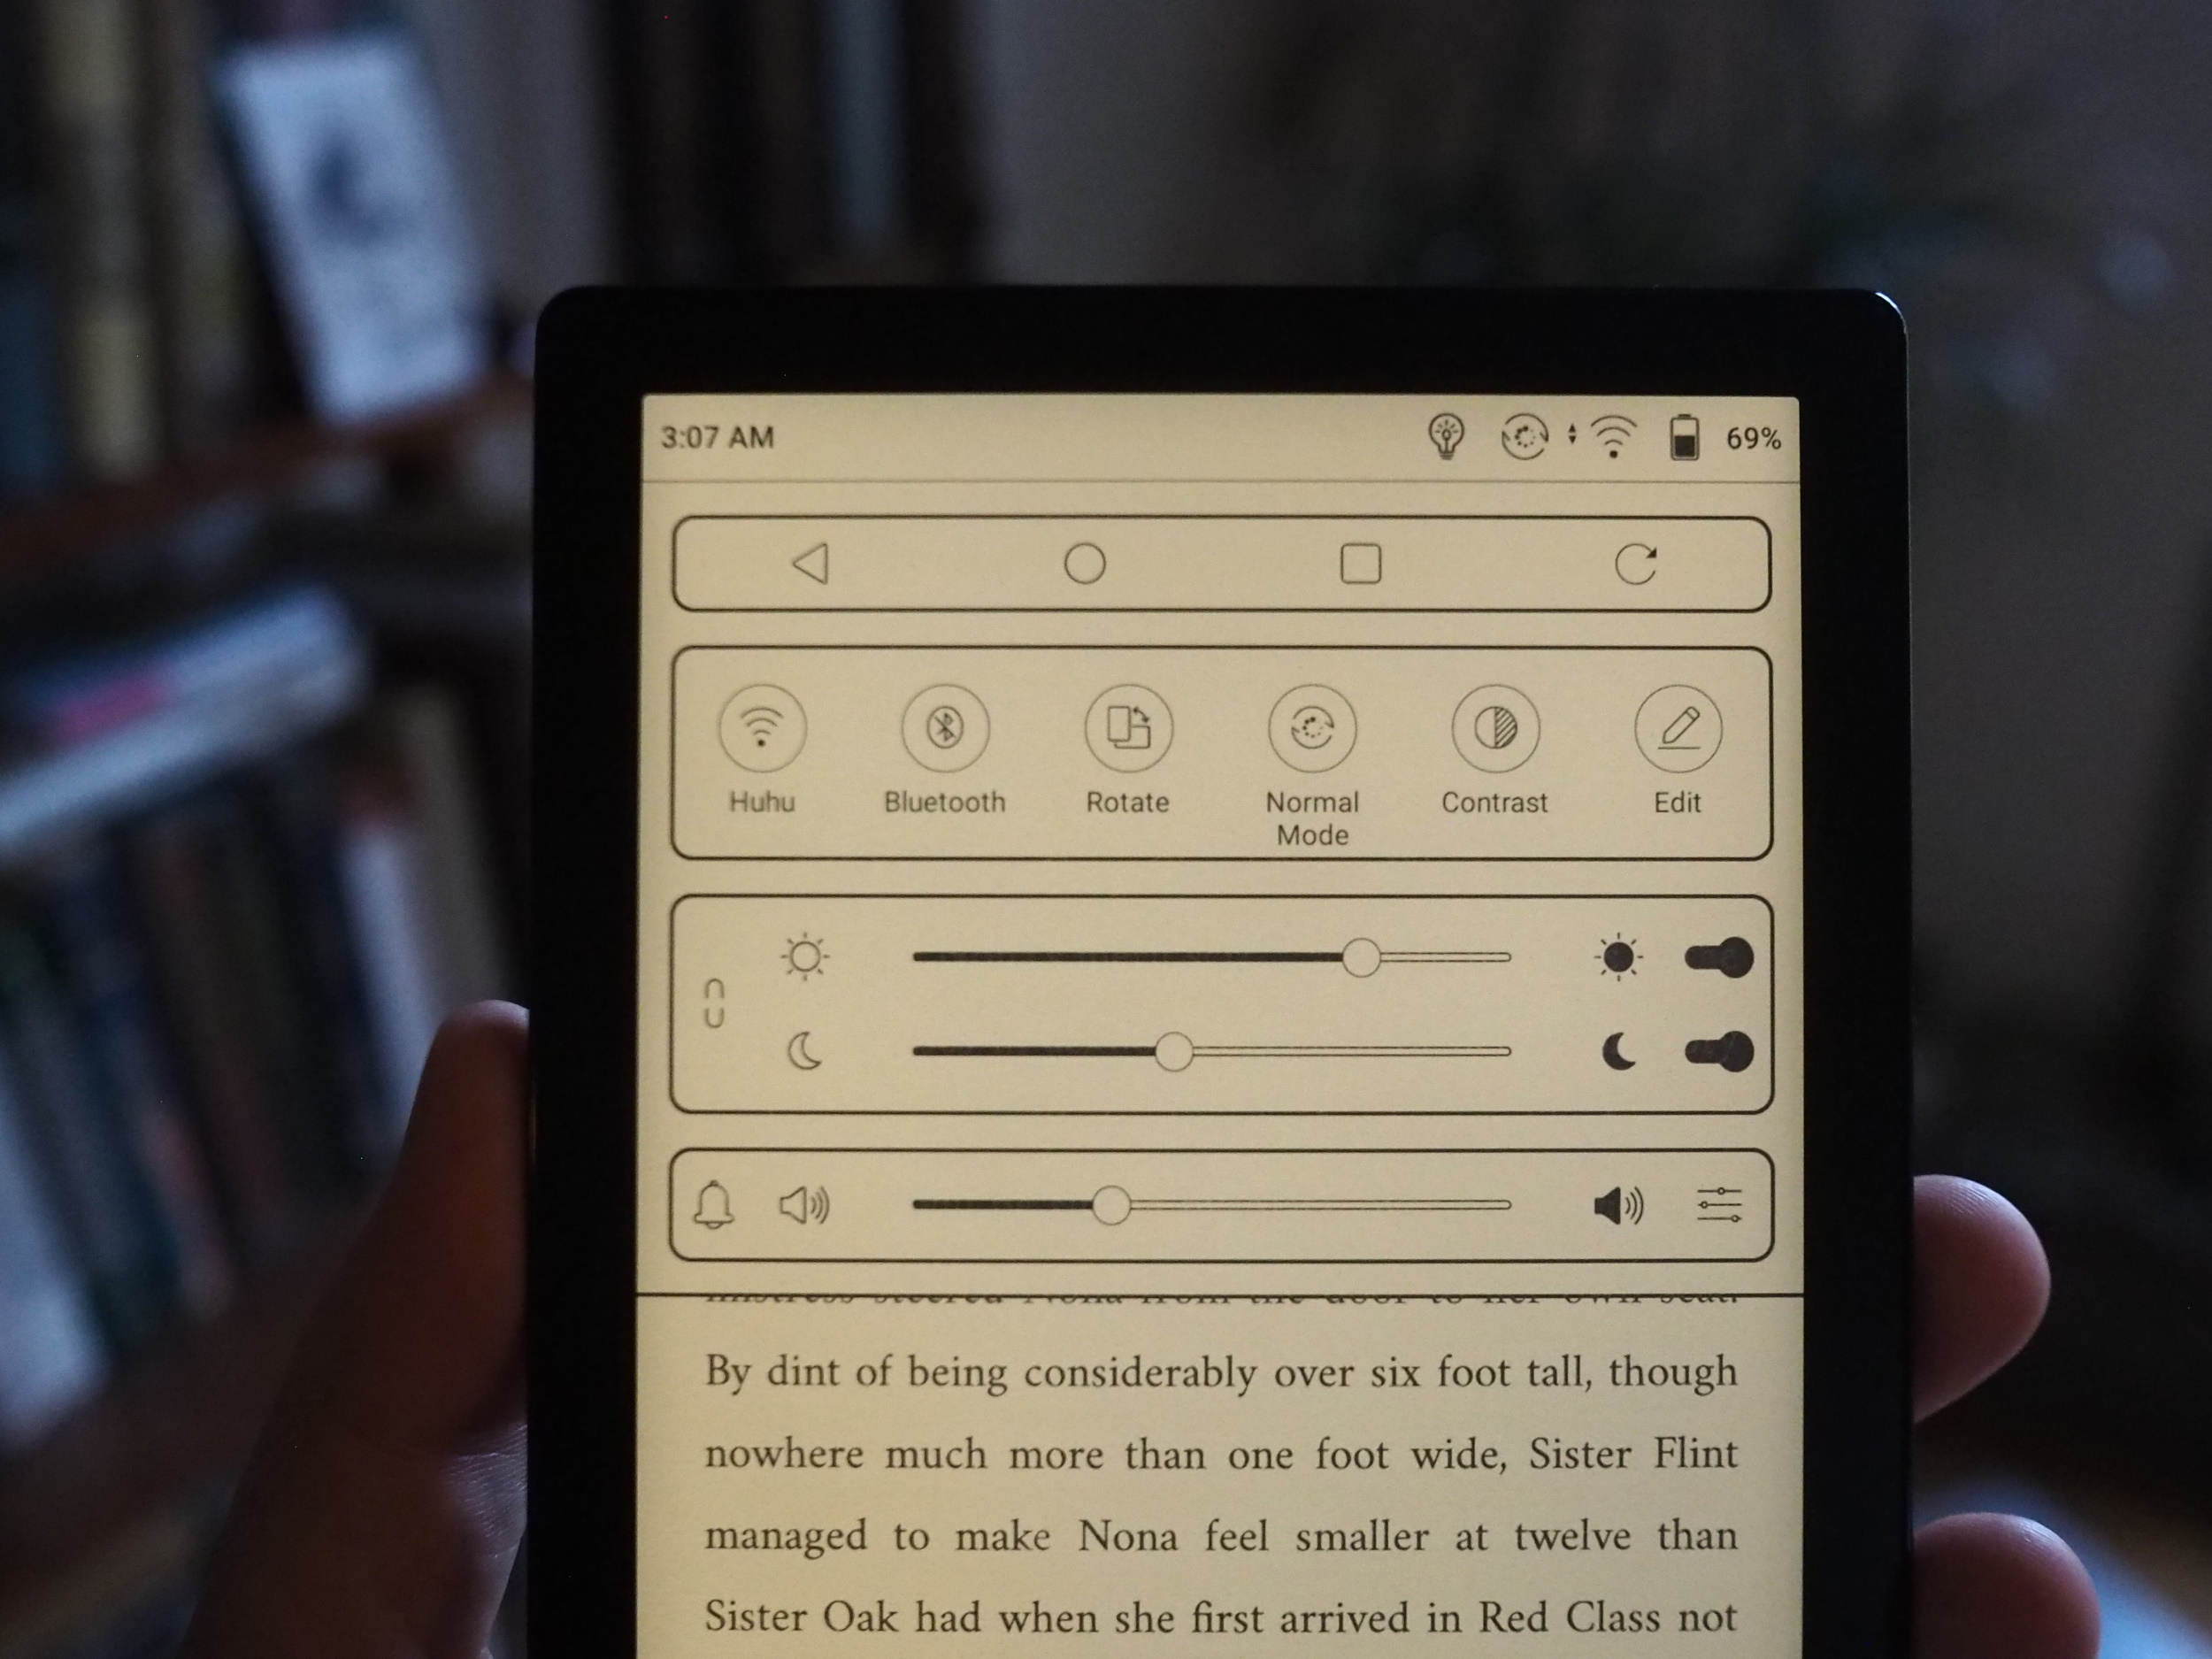 The Boox Poke 3 is my new favorite e-reader | TechCrunch